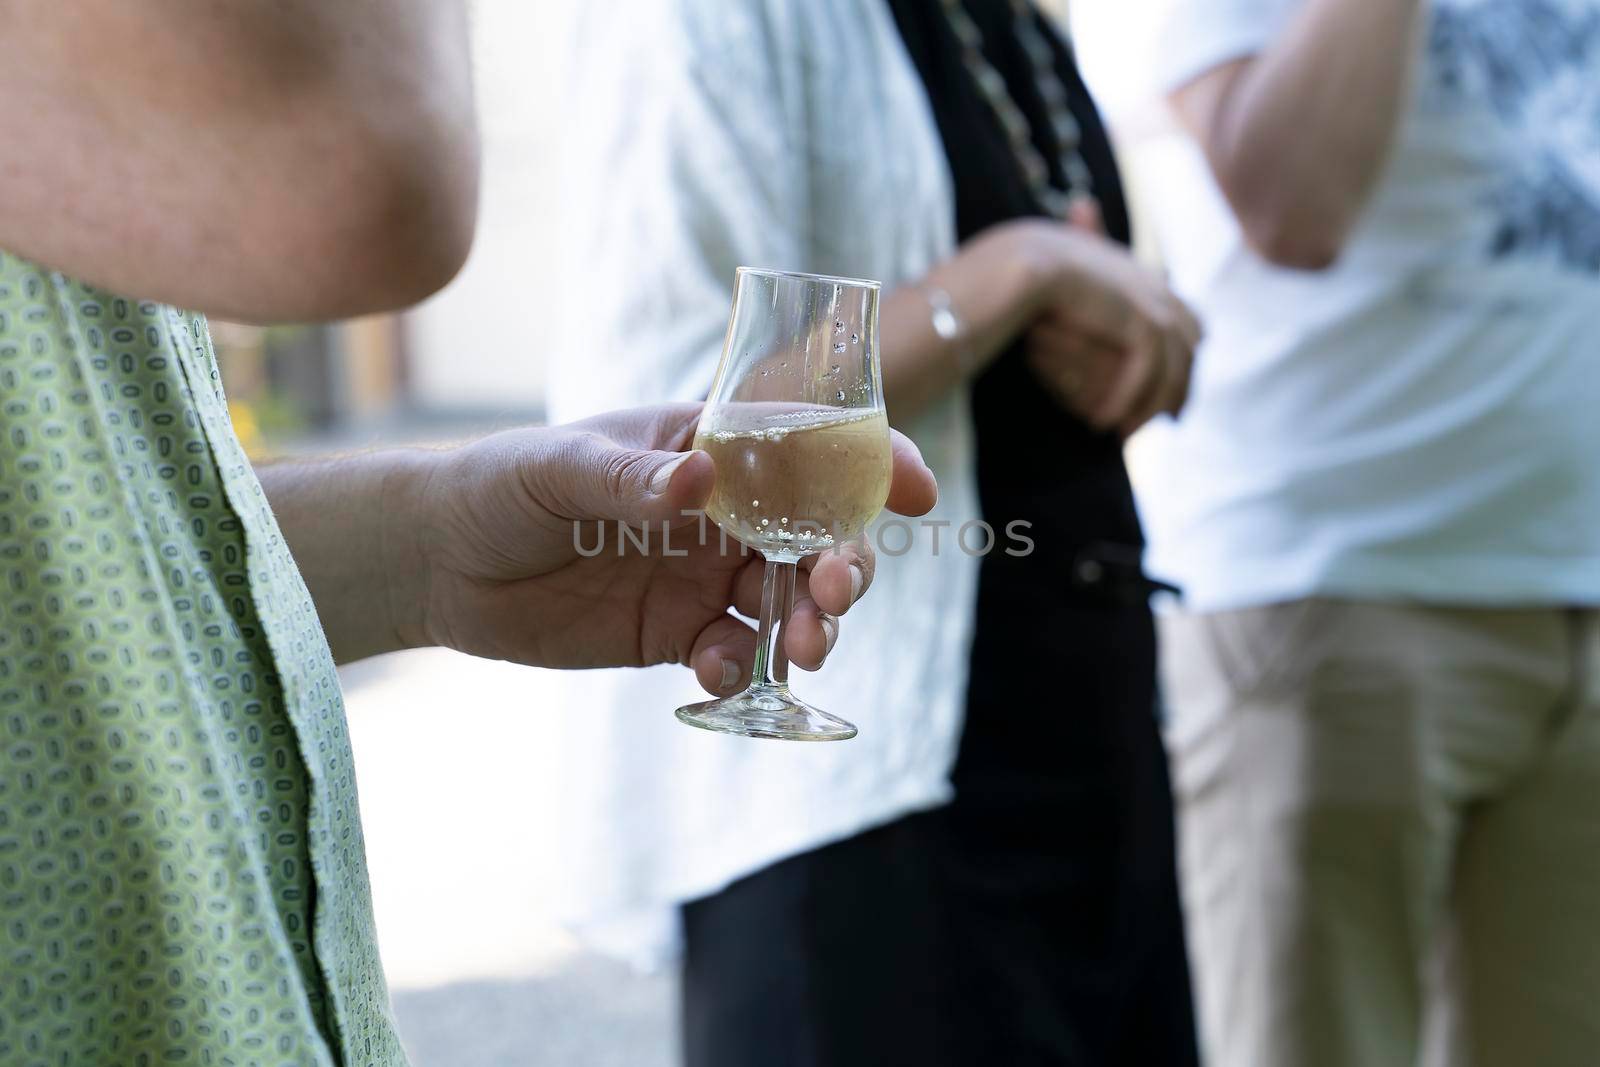 Male hands holding a glass of white wine at an outdoor wine tasting